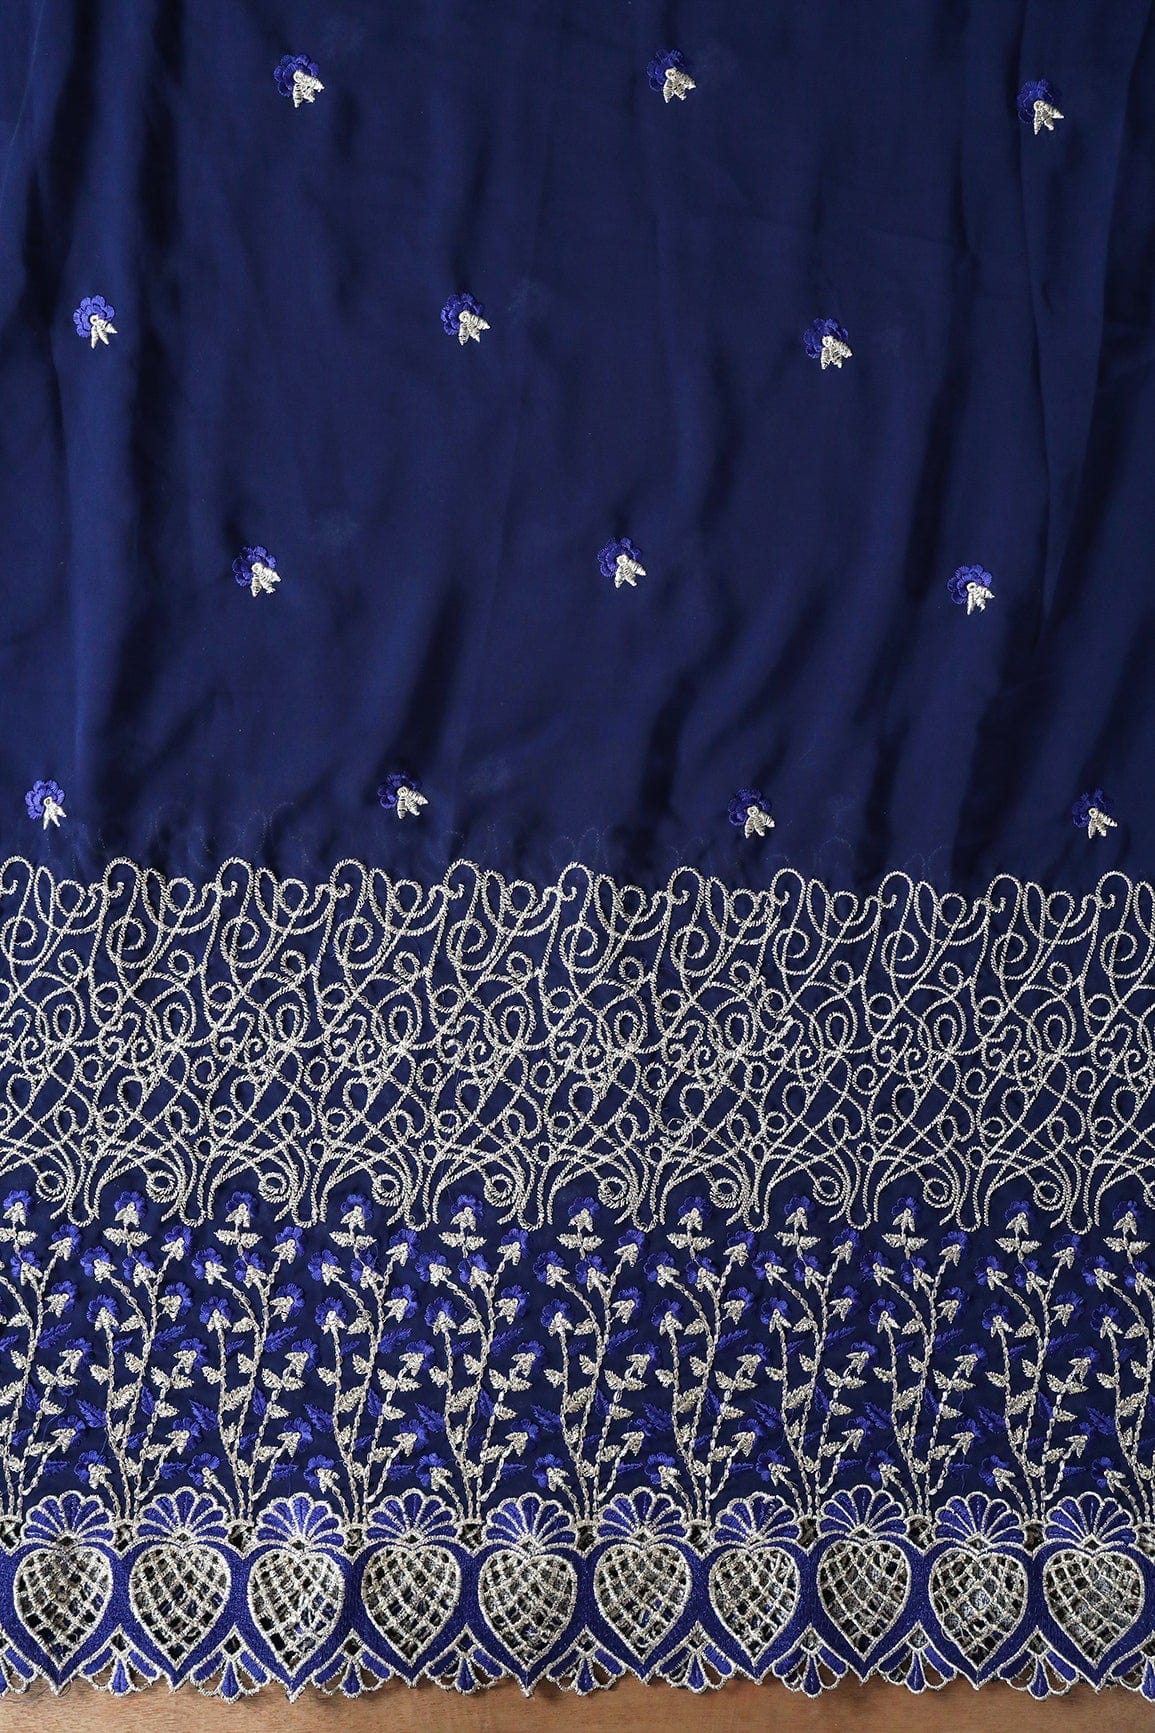 doeraa Embroidery Fabrics Big Width''56'' Blue Thread With Zari Floral Embroidery Work On Navy Blue Georgette Fabric With Border